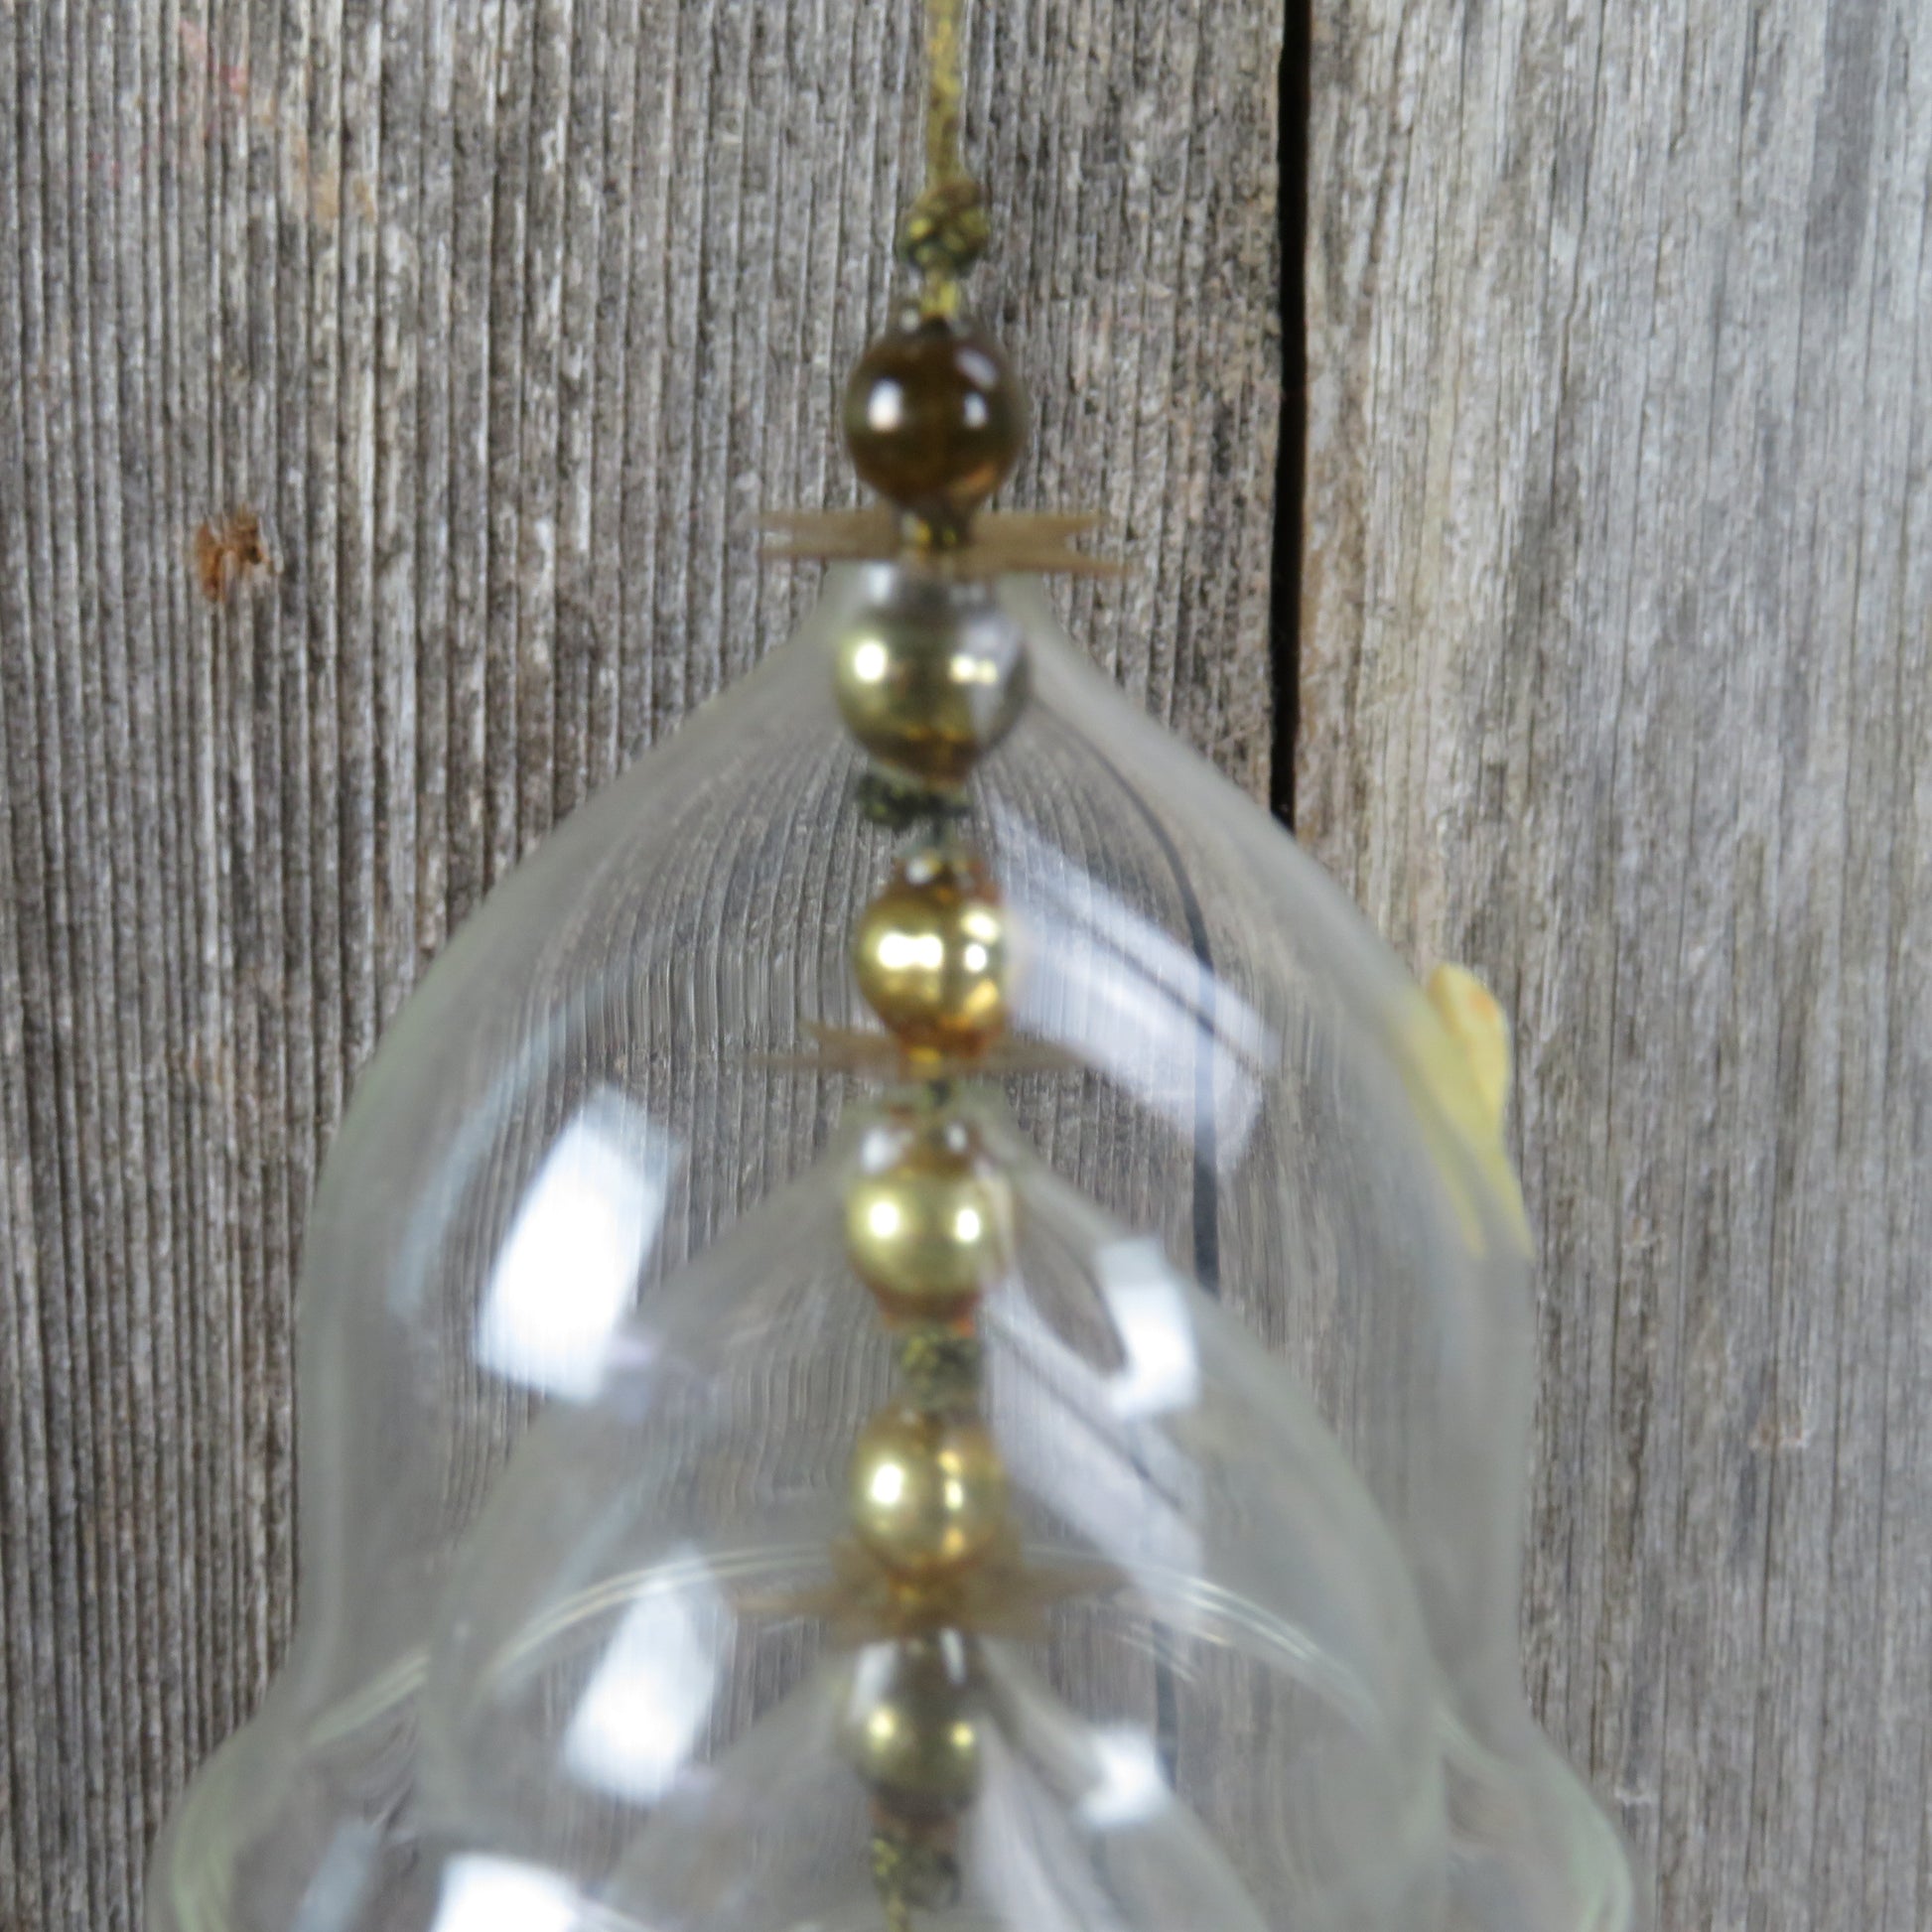 Vintage Glass Bell Ornament Graduated 3 Tier Germany Gold Christmas Ornament Tiered Bell - At Grandma's Table